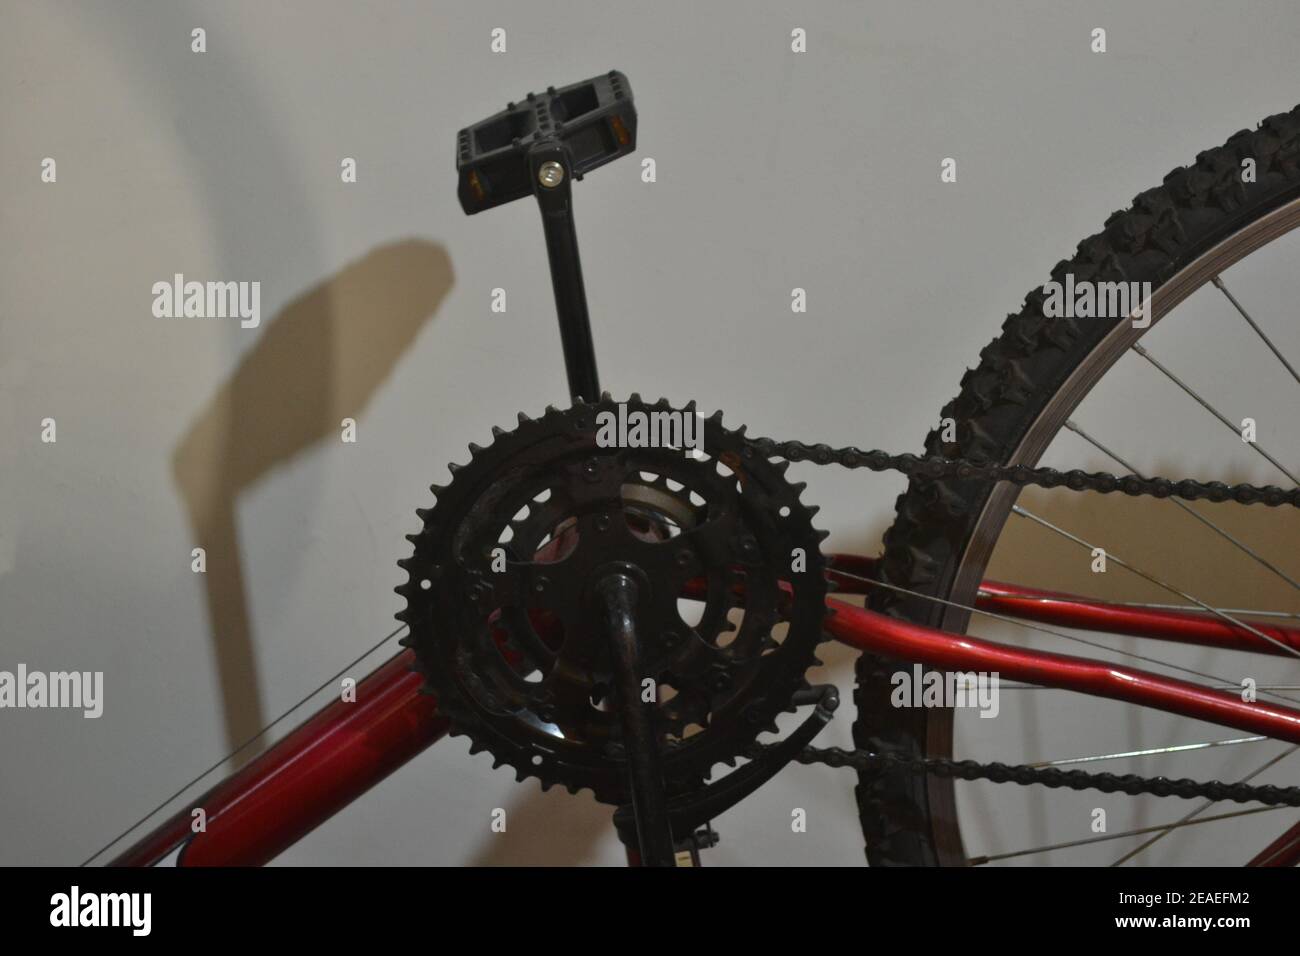 Bicycle. Sprocket, chain, pedal, tire, spokes and part of the frame of a red bicycle for domestic or sport use, photo zoom, white background, Brazil, Stock Photo